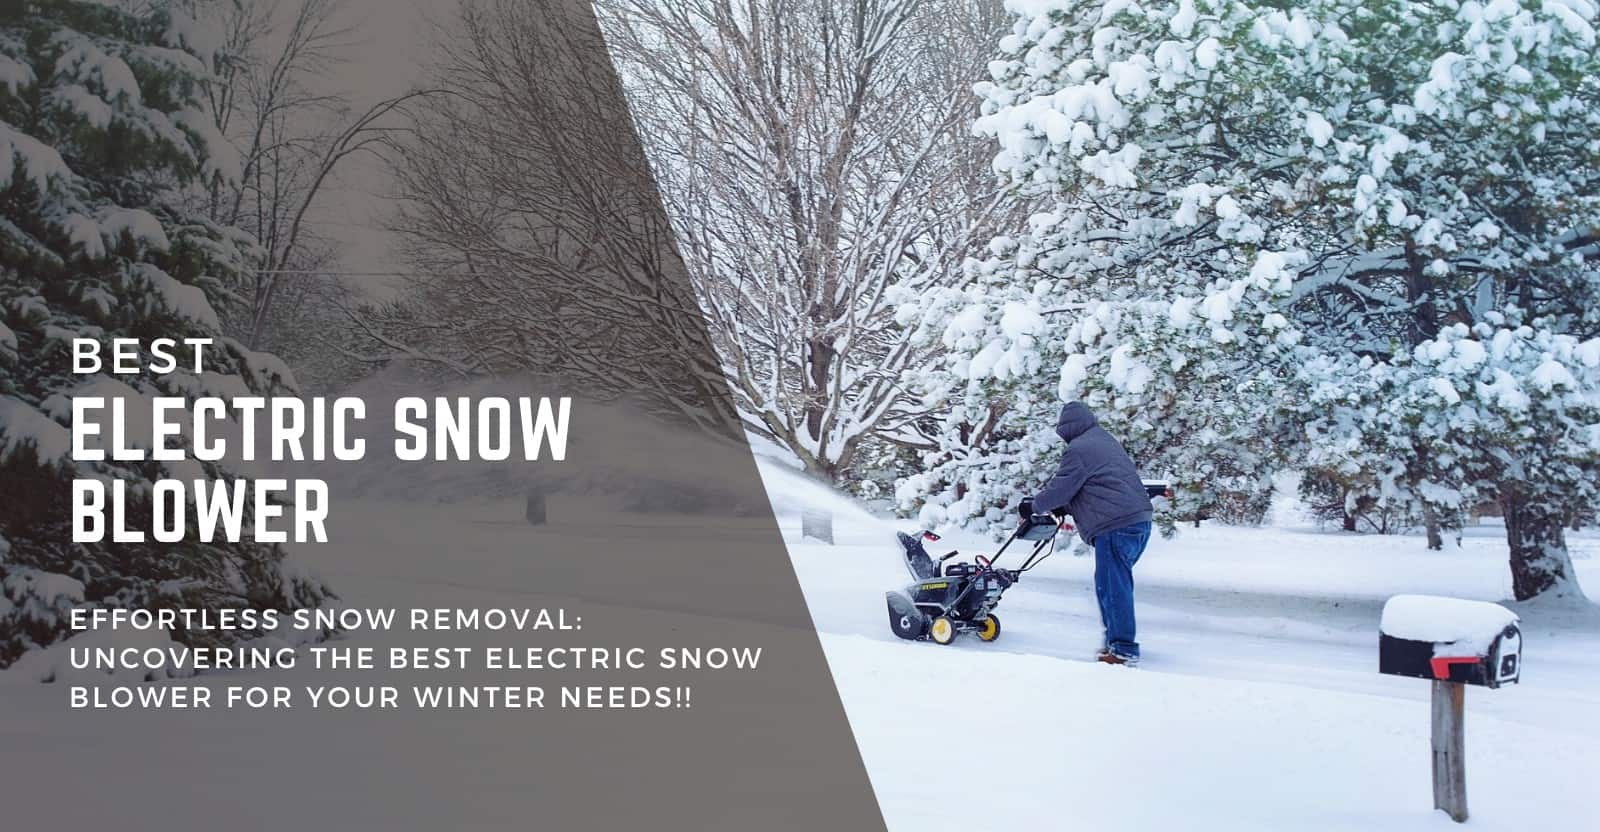 Best Electric Snow Blower Review